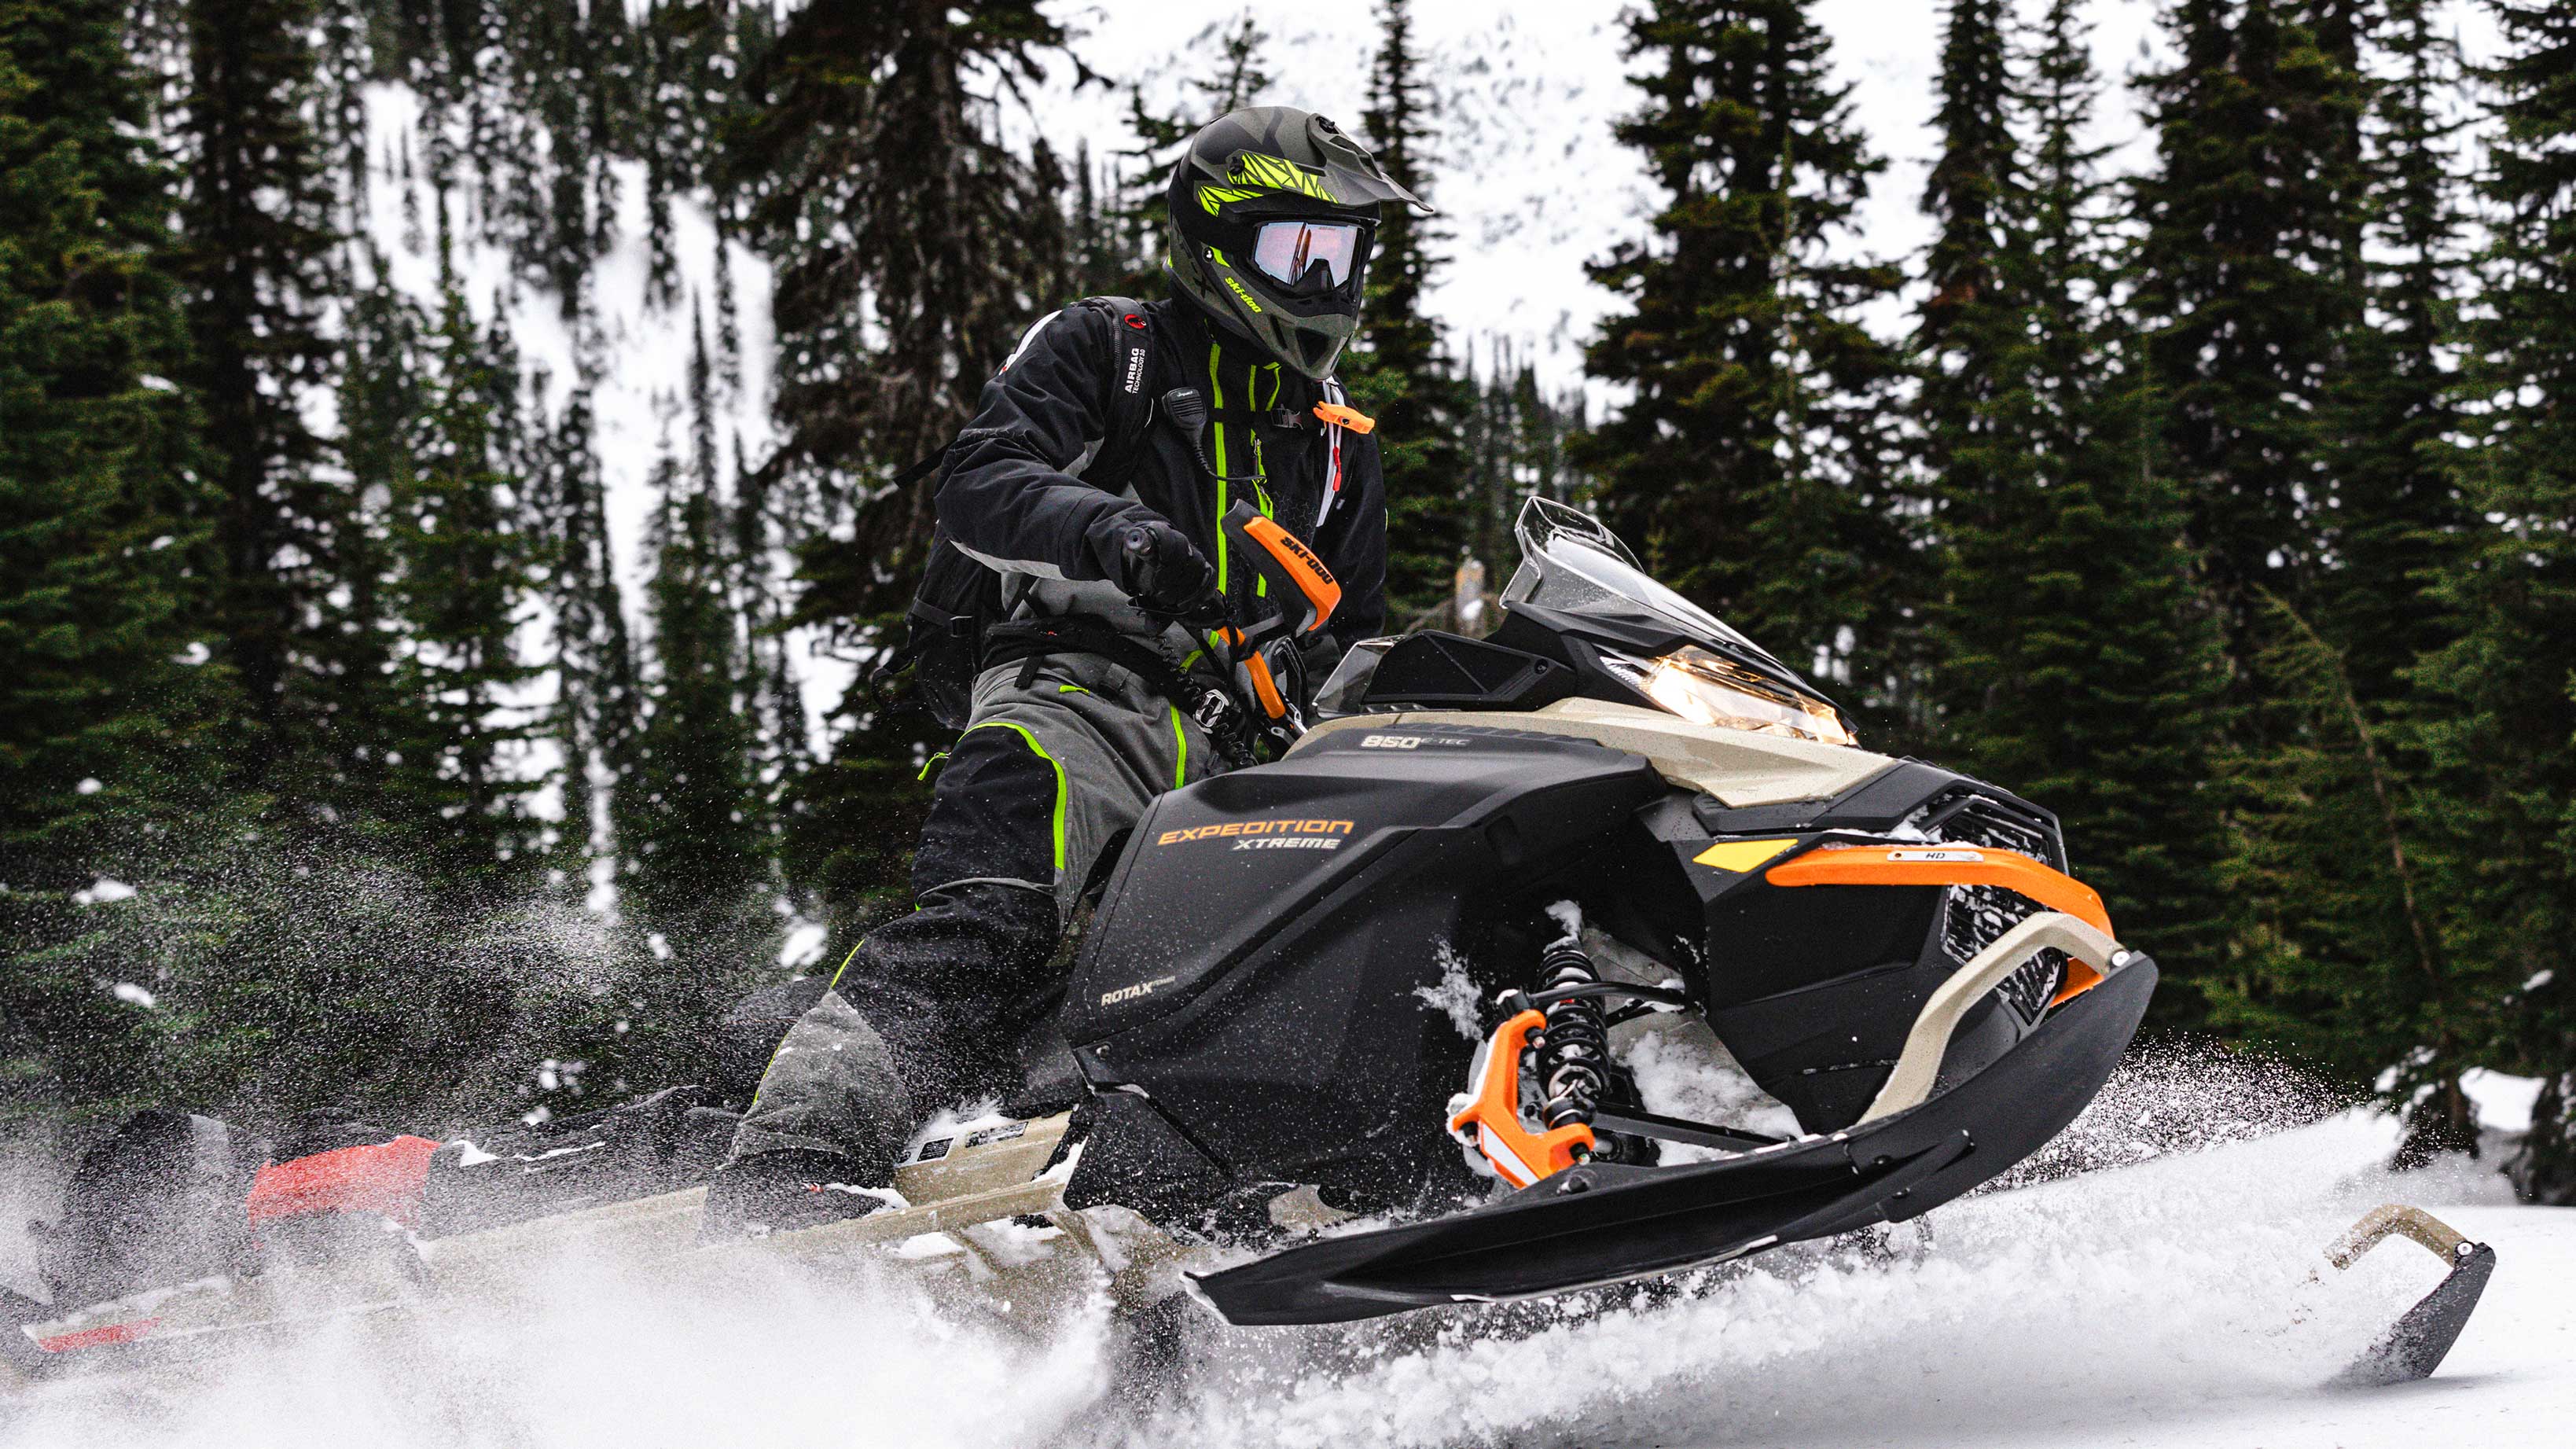 Rider driving his Ski-Doo Expedition, utility snowmobile